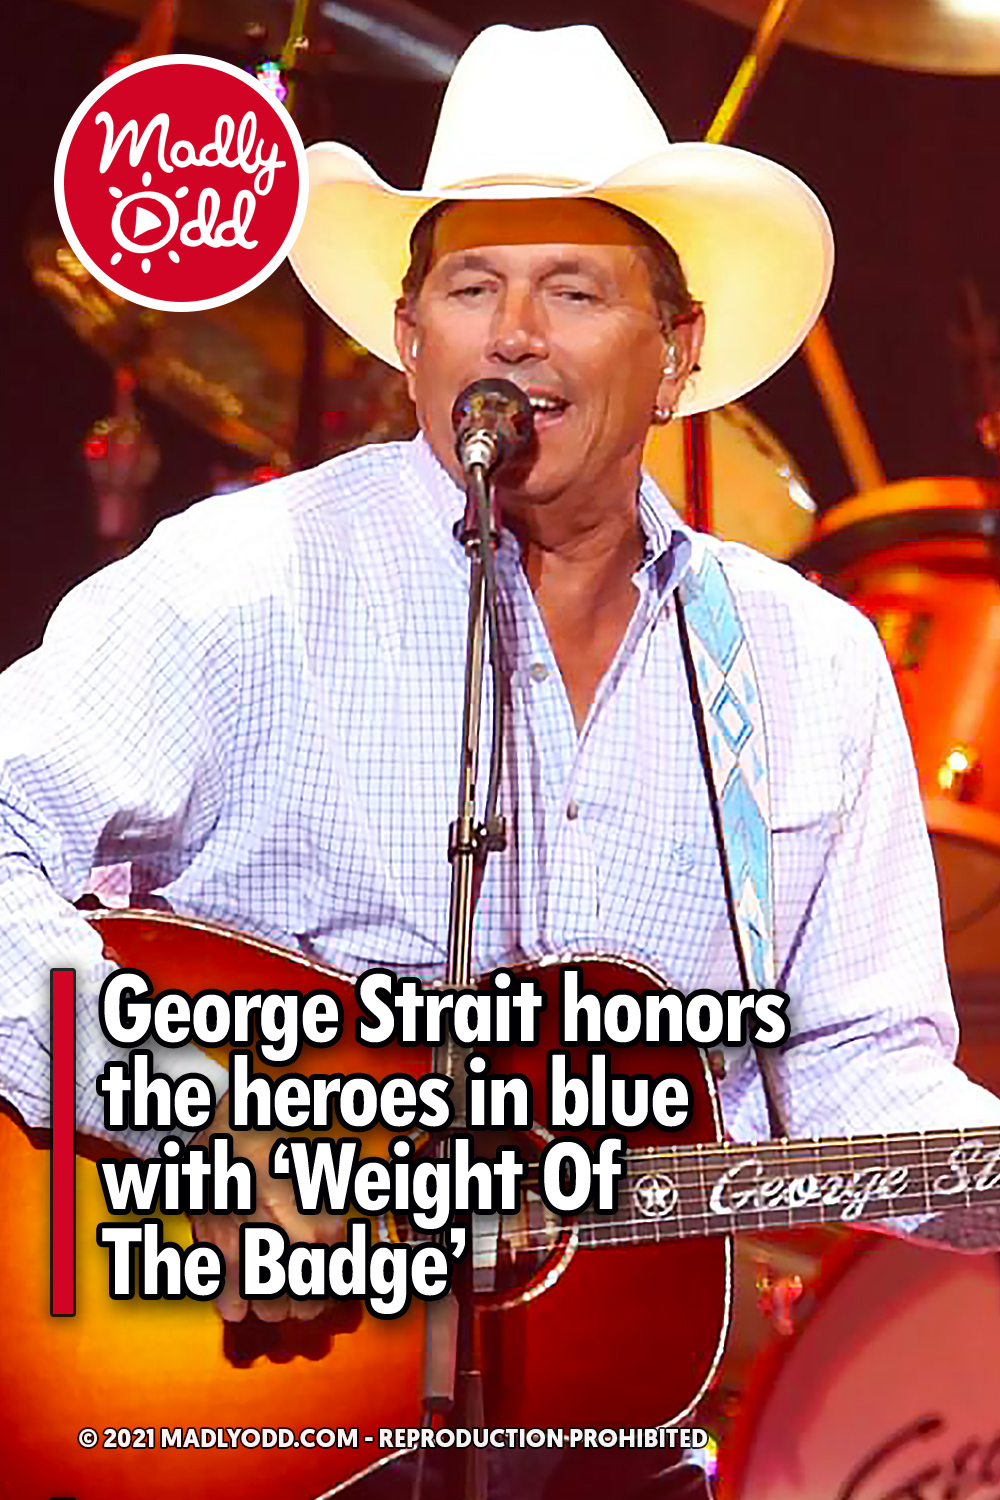 George Strait honors the heroes in blue with ‘Weight Of The Badge’